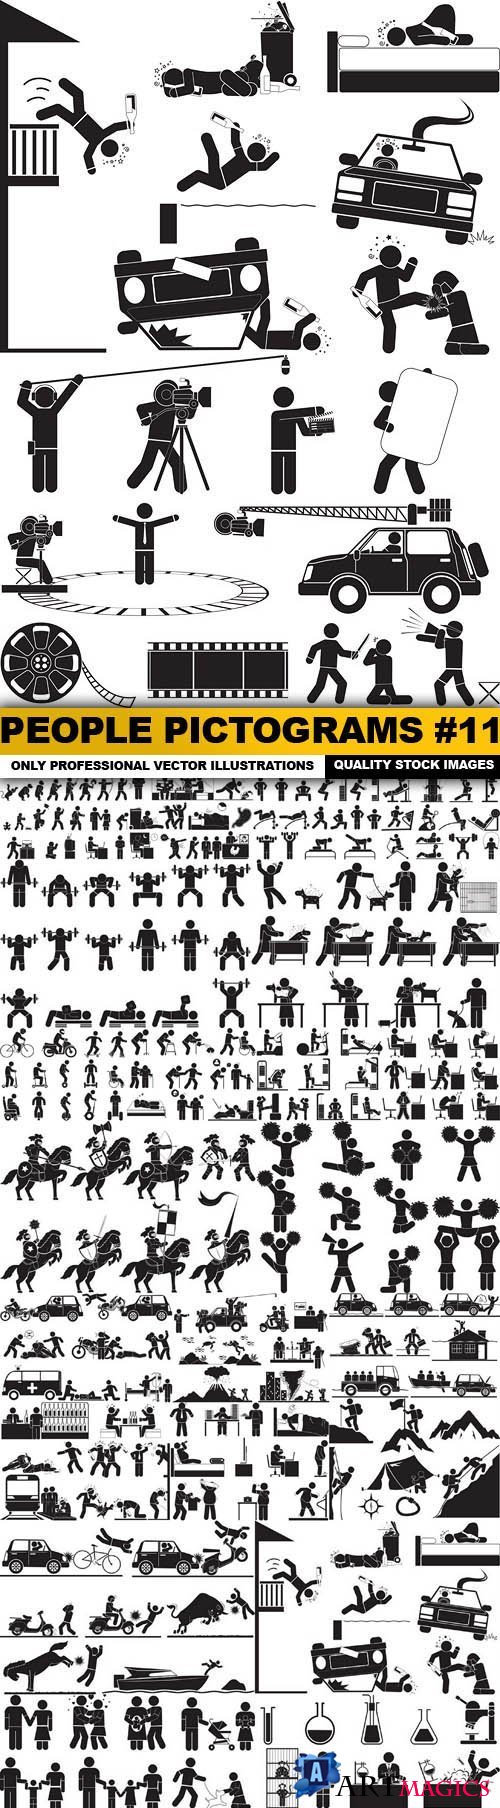 People Pictograms #11 - 25 Vector